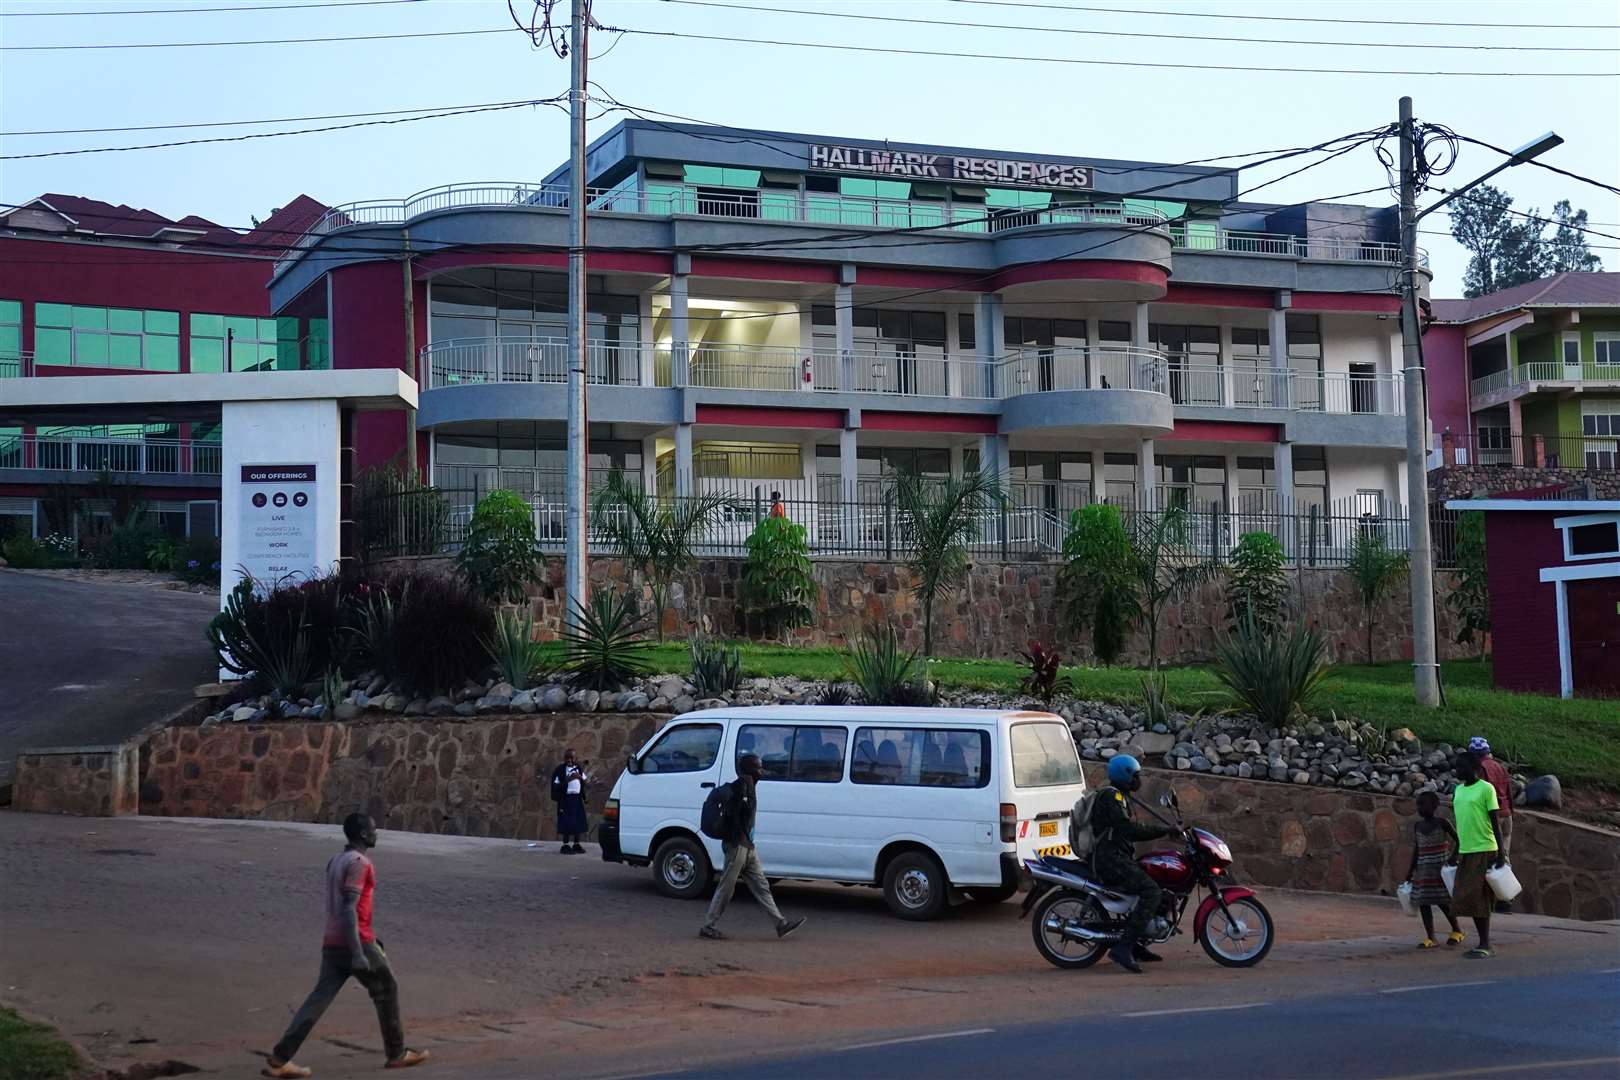 The Hallmark Residences Hotel in Kigali, Rwanda, where it is believed migrants from the UK are expected to be taken when they arrive (Victoria Jones/PA)